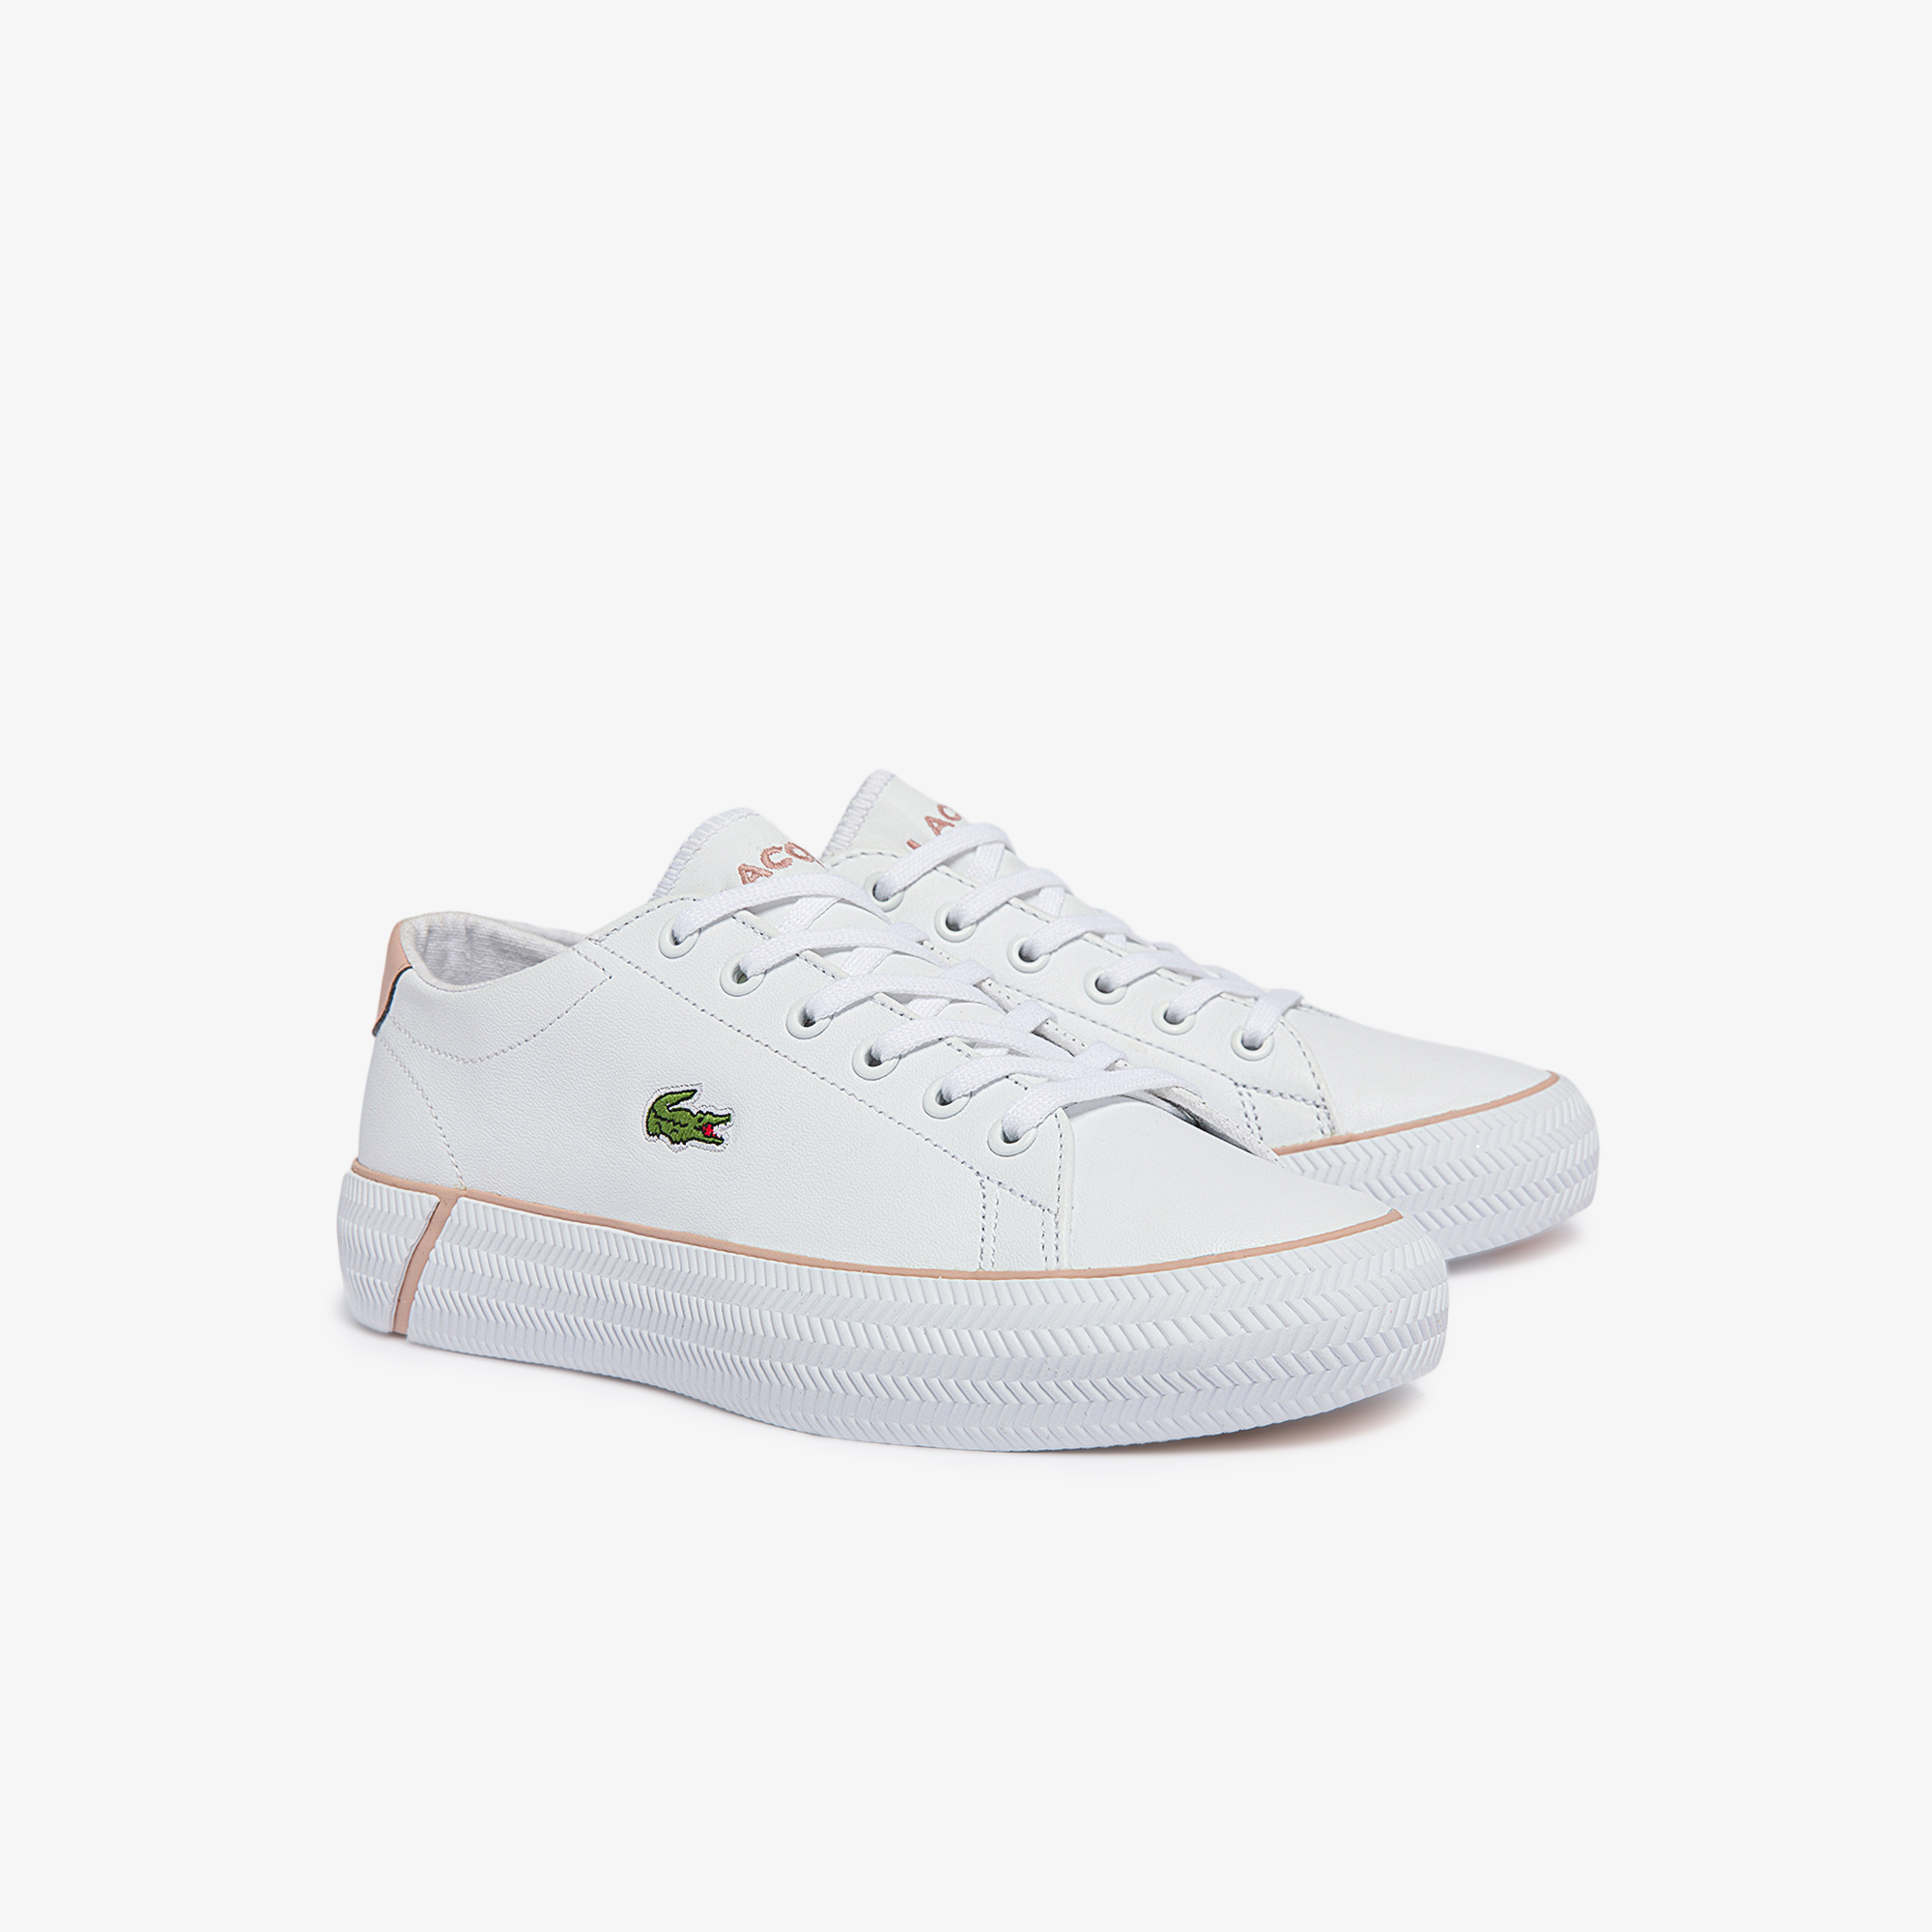 Women's Gripshot Bl Leather Sneakers | LACOSTE